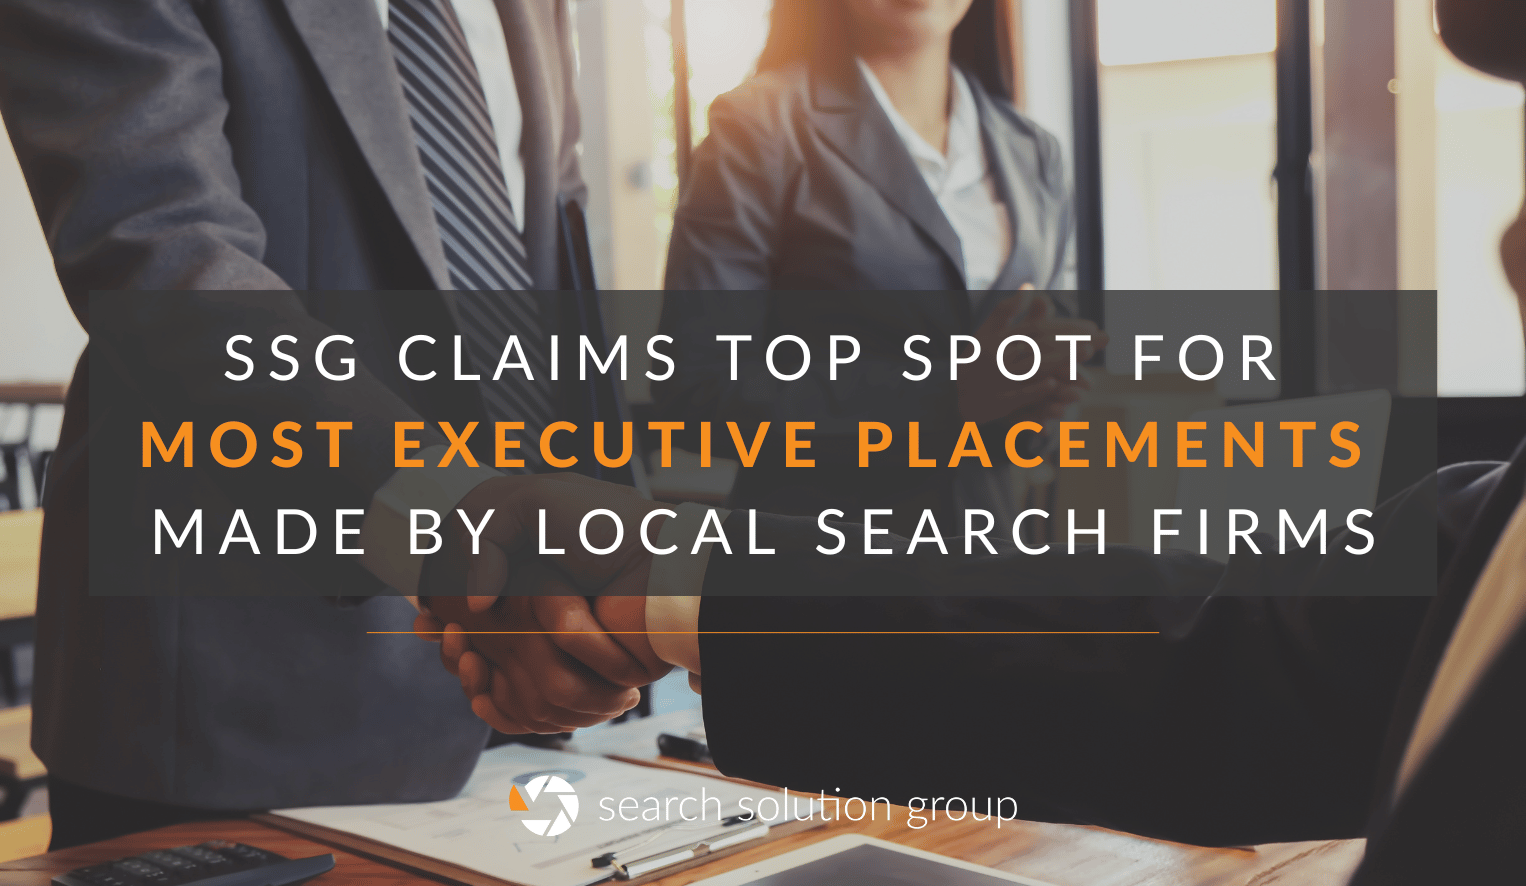 SSG Claims Top Spot for Most Executive Placements made by Local Search Firms, as Ranked by Charlotte Business Journal